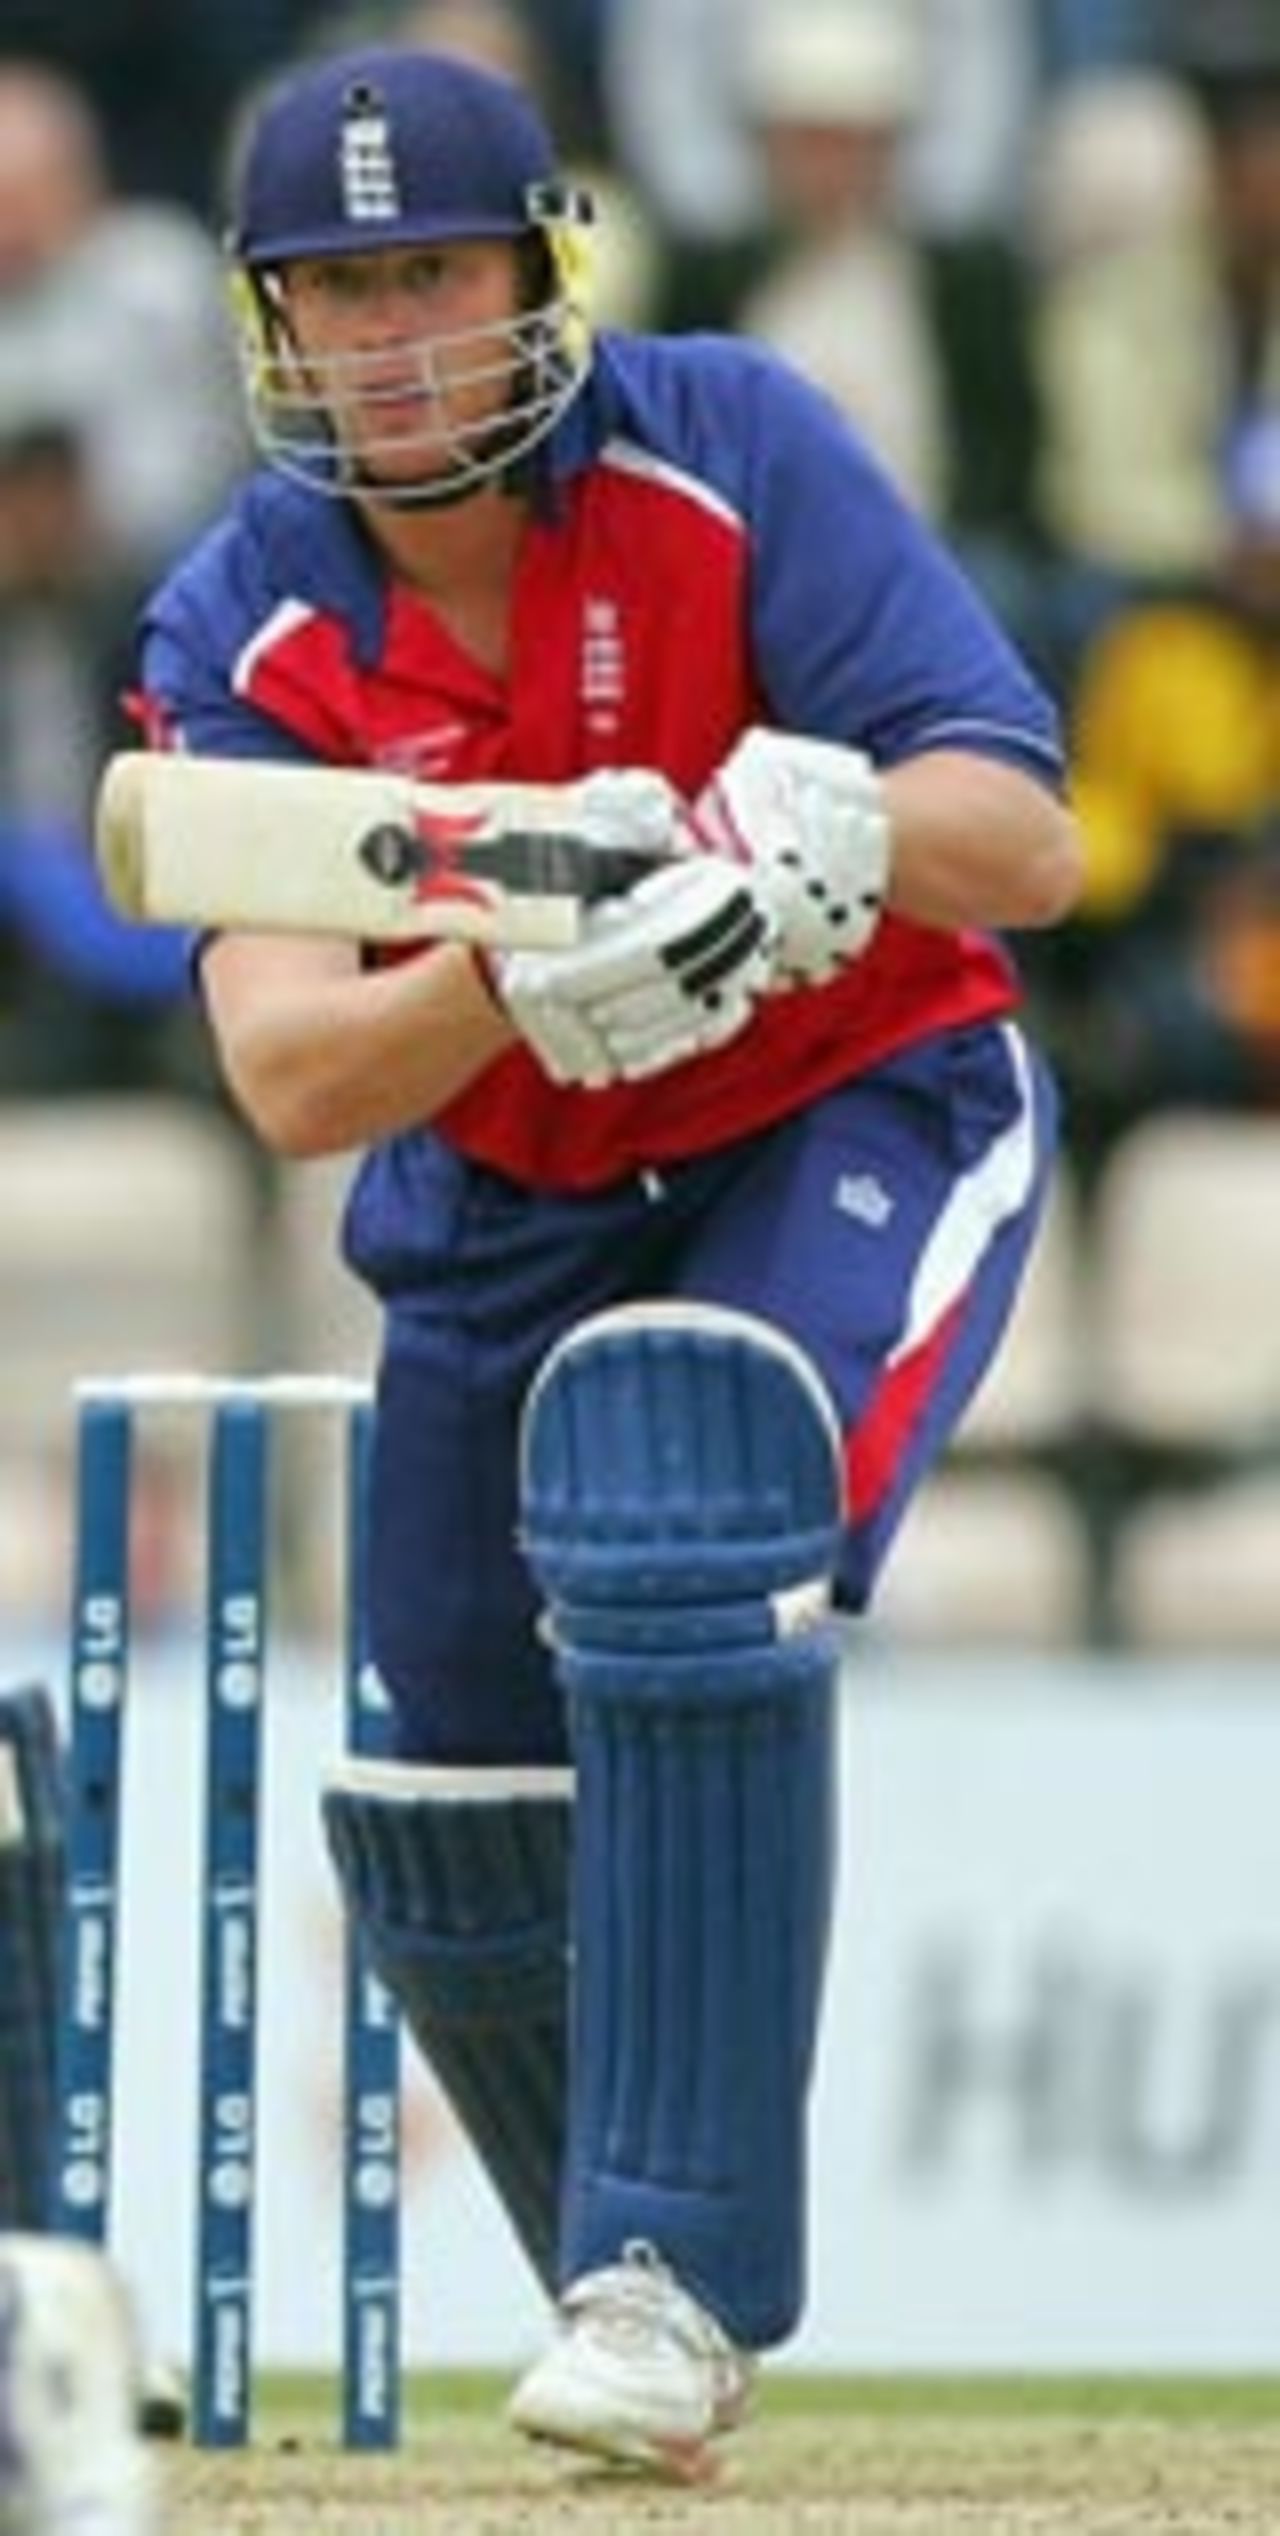 Andrew Flintoff on his way to another hundred, England v Sri Lanka, ICC Champions Trophy, September 18 2004